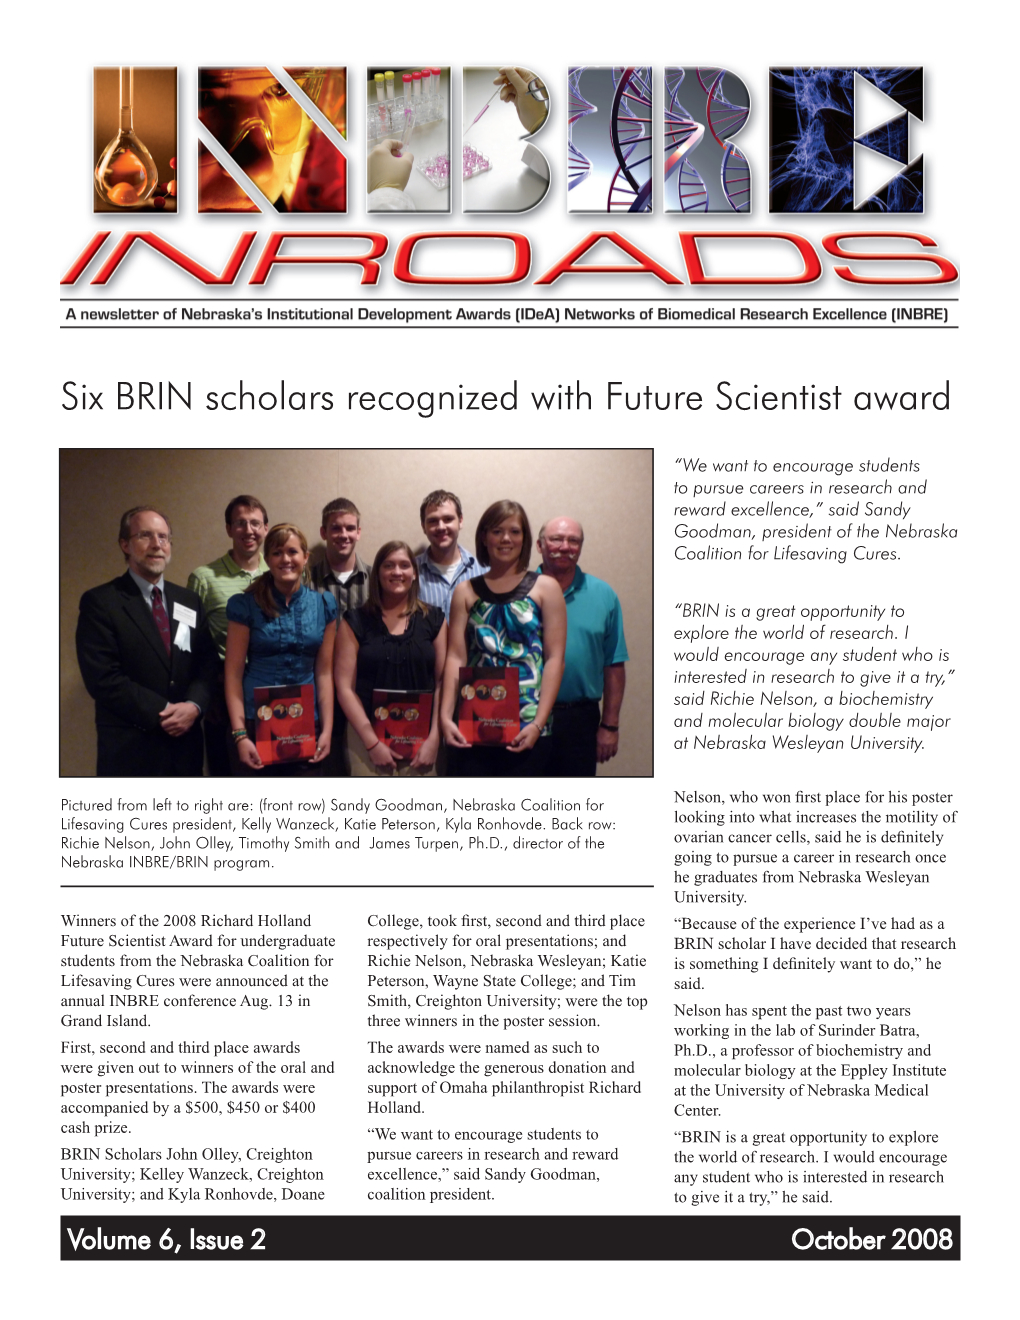 Six BRIN Scholars Recognized with Future Scientist Award